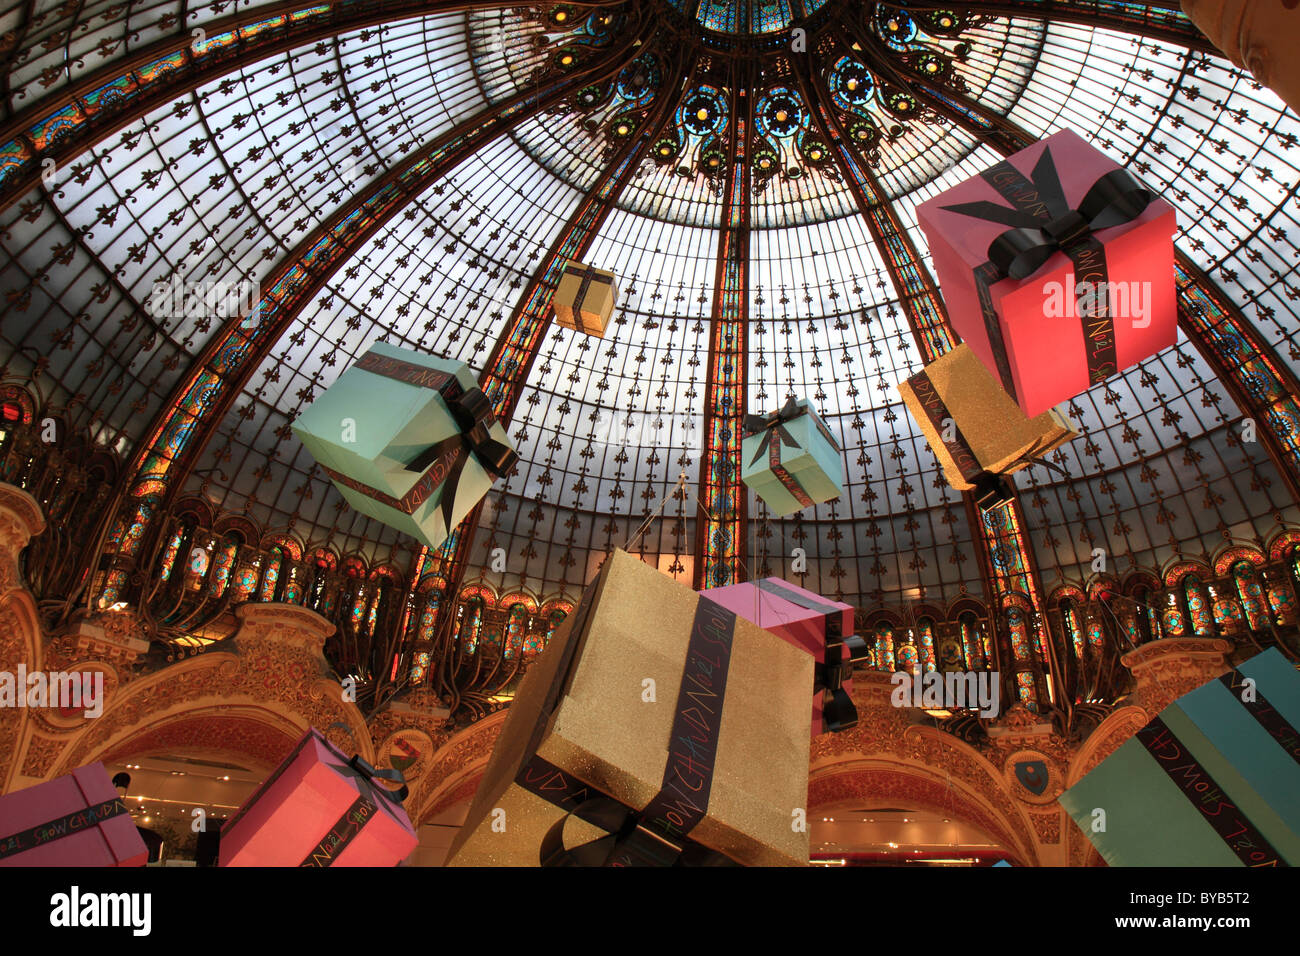 Art Nouveau dome of the Great Hall, with large gift packages, Galeries Lafayette department store, Paris, France, Europe Stock Photo